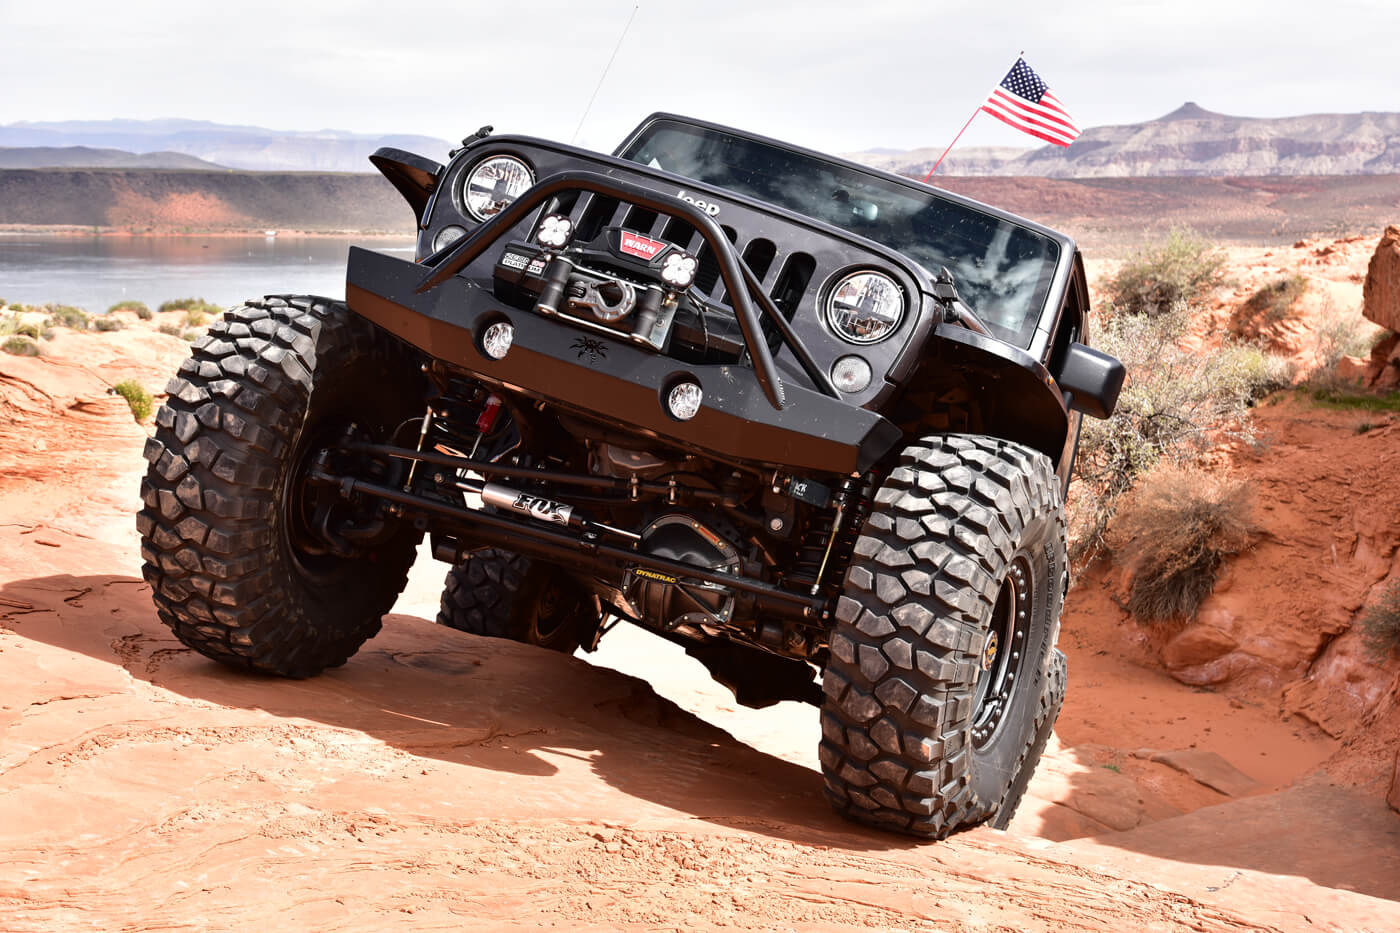 Doctor's Orders: How a Impulse Offroad Got This Jeep JK Sick